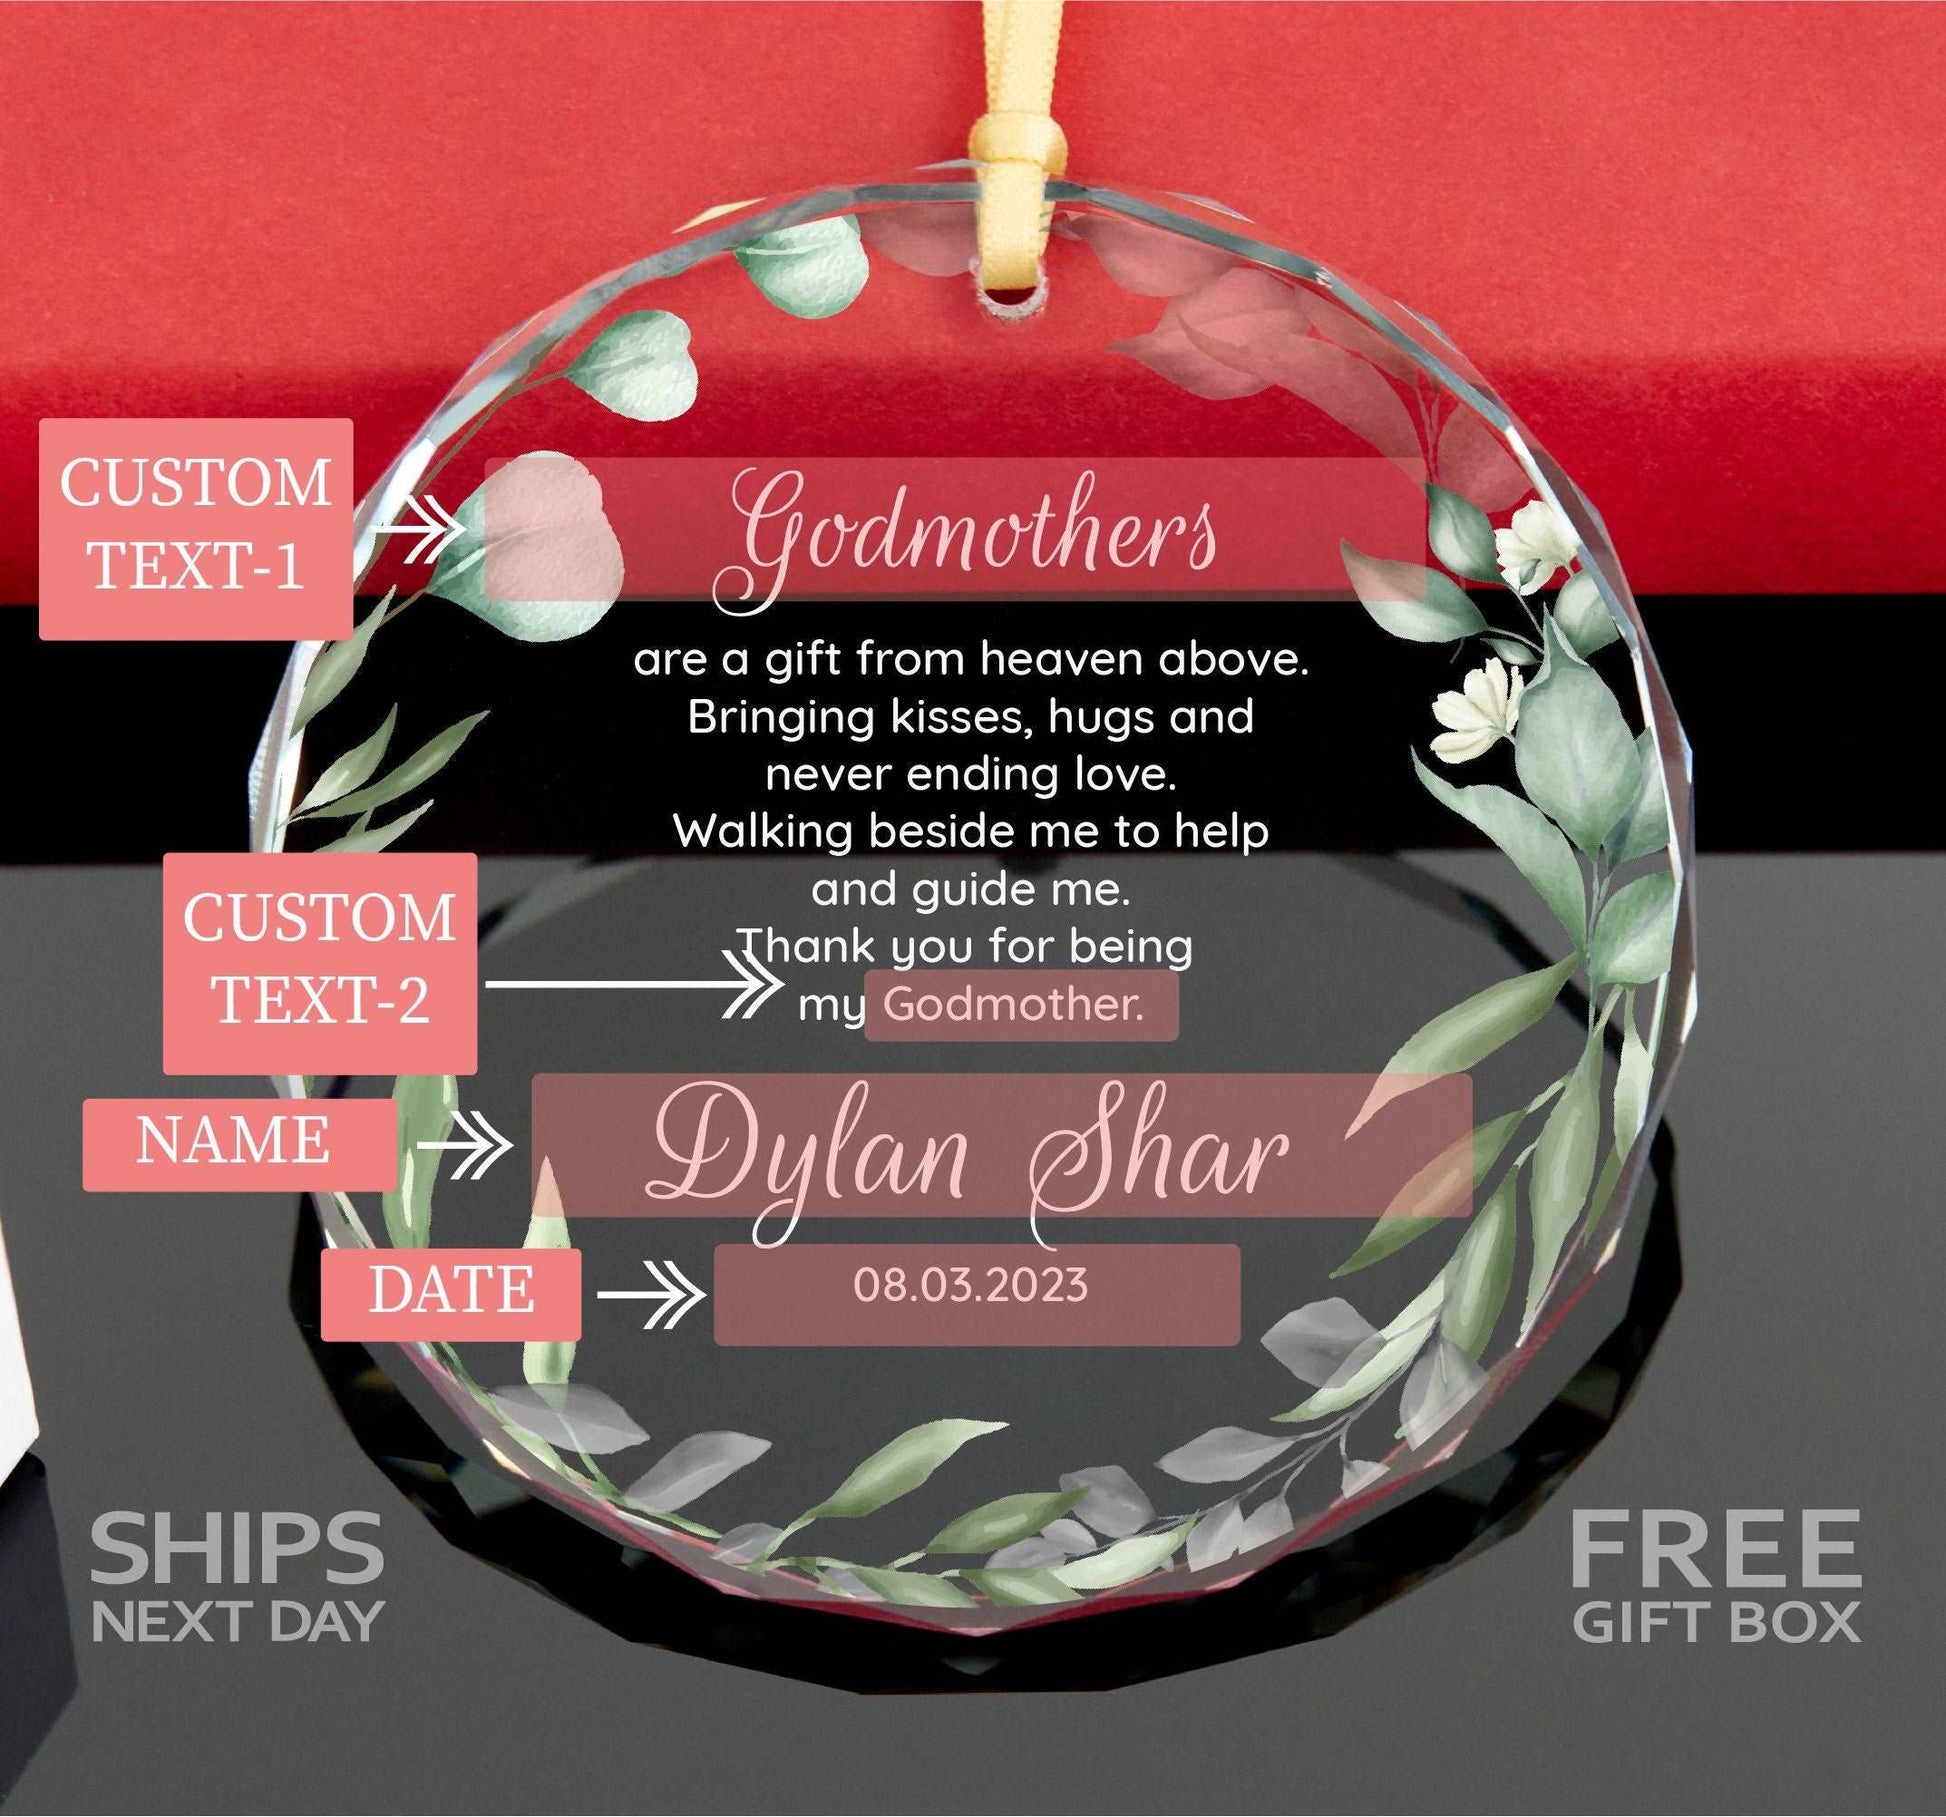 a personalized glass ornament for a wedding